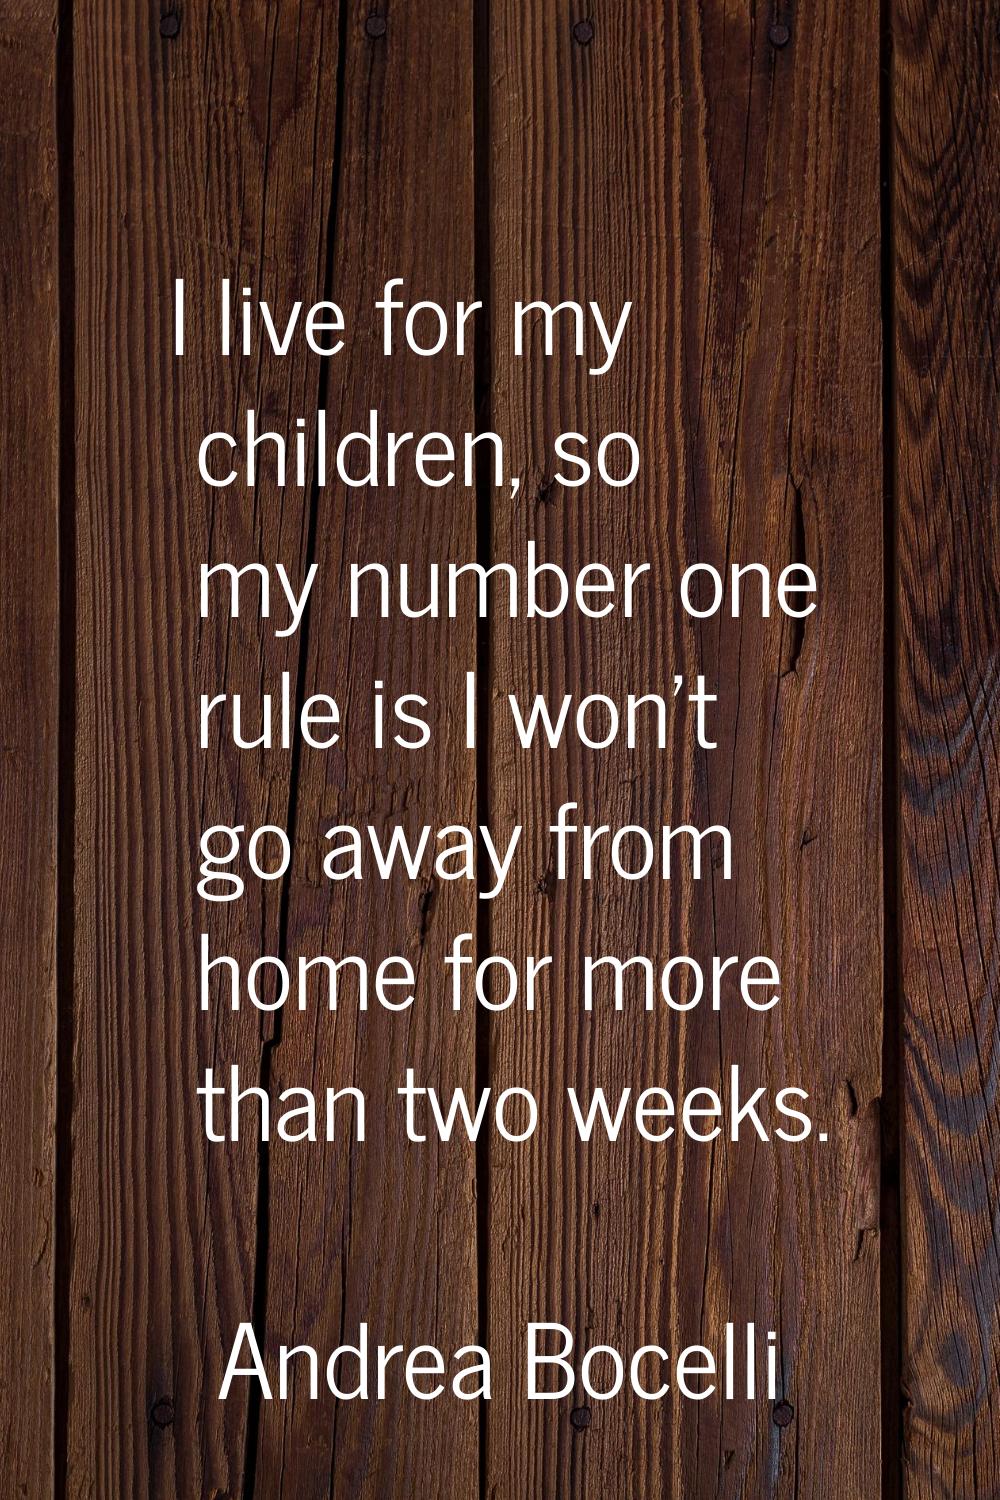 I live for my children, so my number one rule is I won't go away from home for more than two weeks.